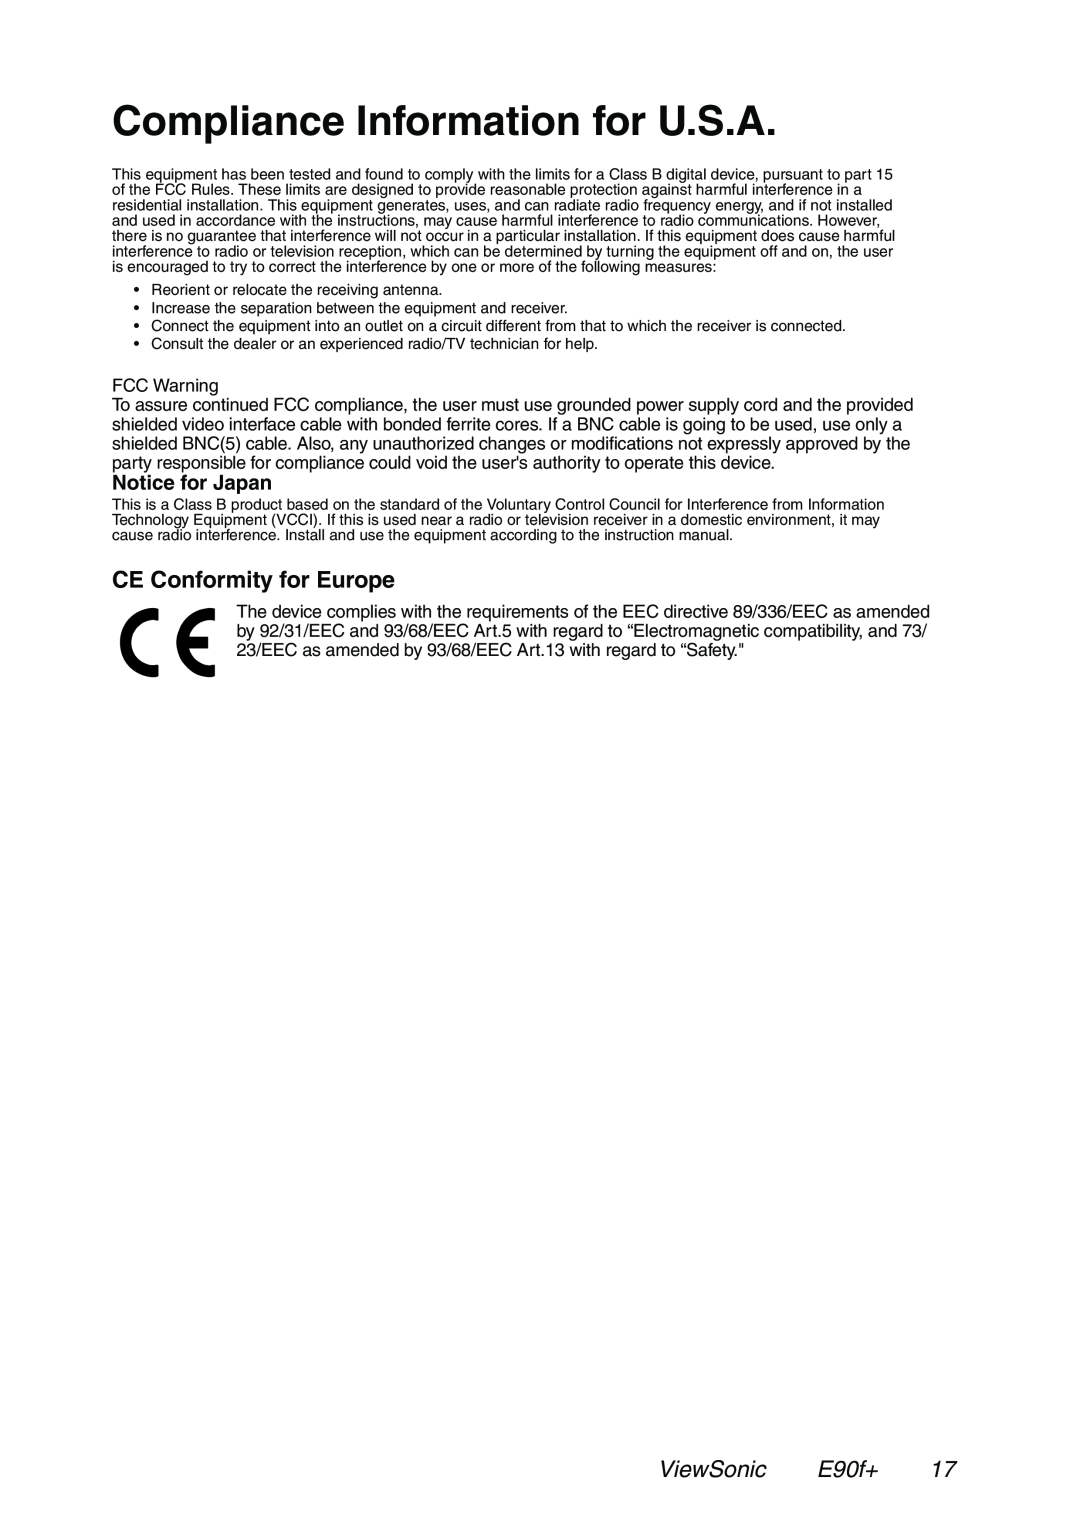 ViewSonic manual Compliance Information for U.S.A, CE Conformity for Europe, ViewSonic E90f+ 